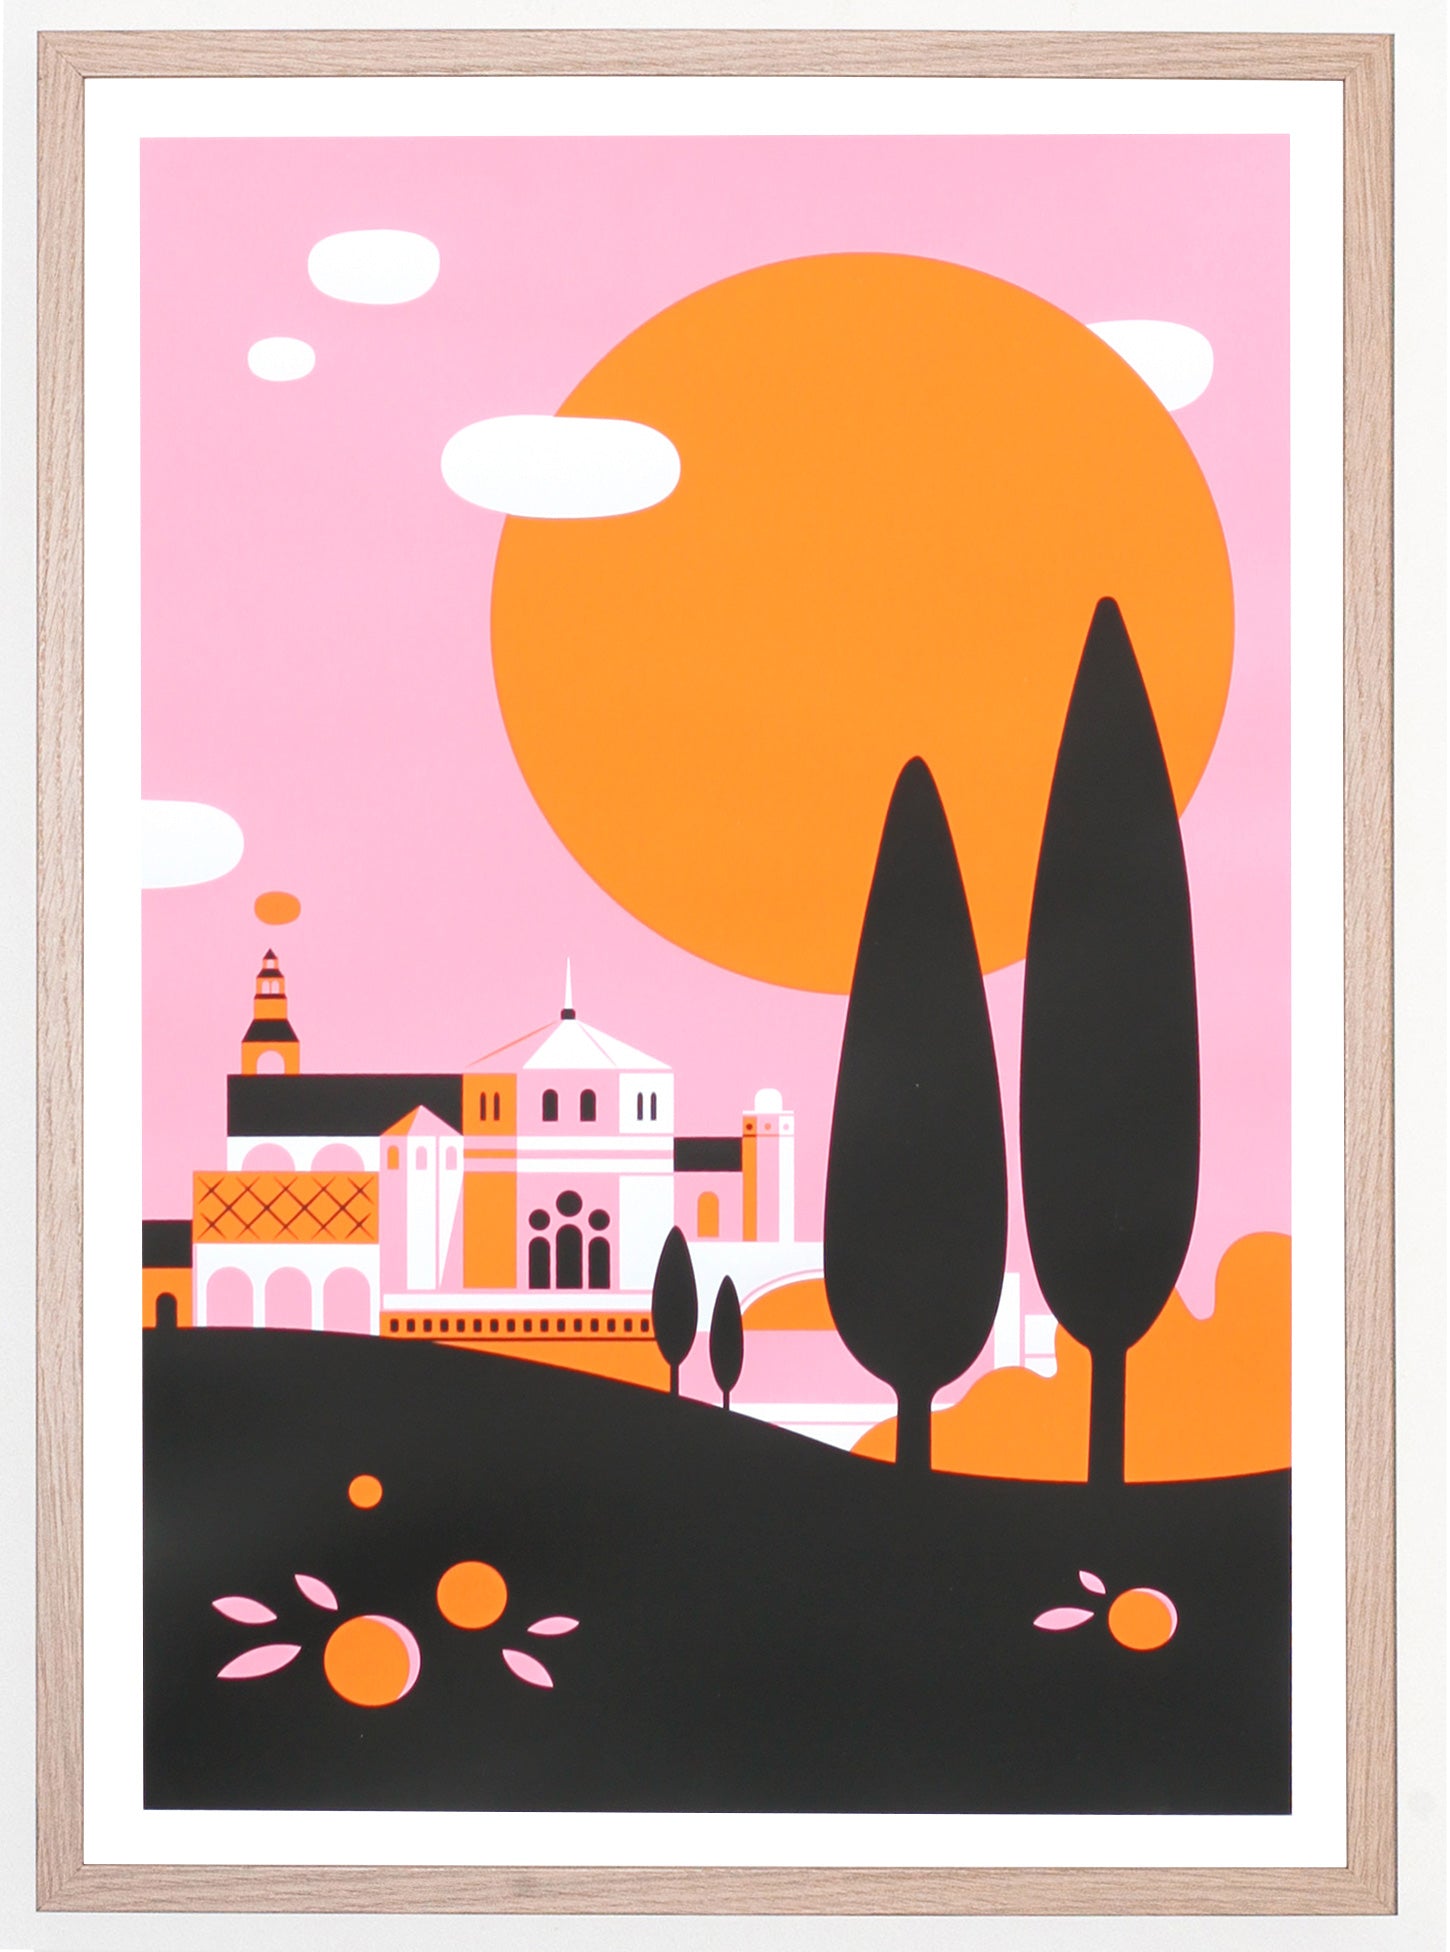 Limited edition print by Petra Eriksson for The Jaunt of a building on a hillside with four teardrop shaped trees and a large orange sun in a pink sky